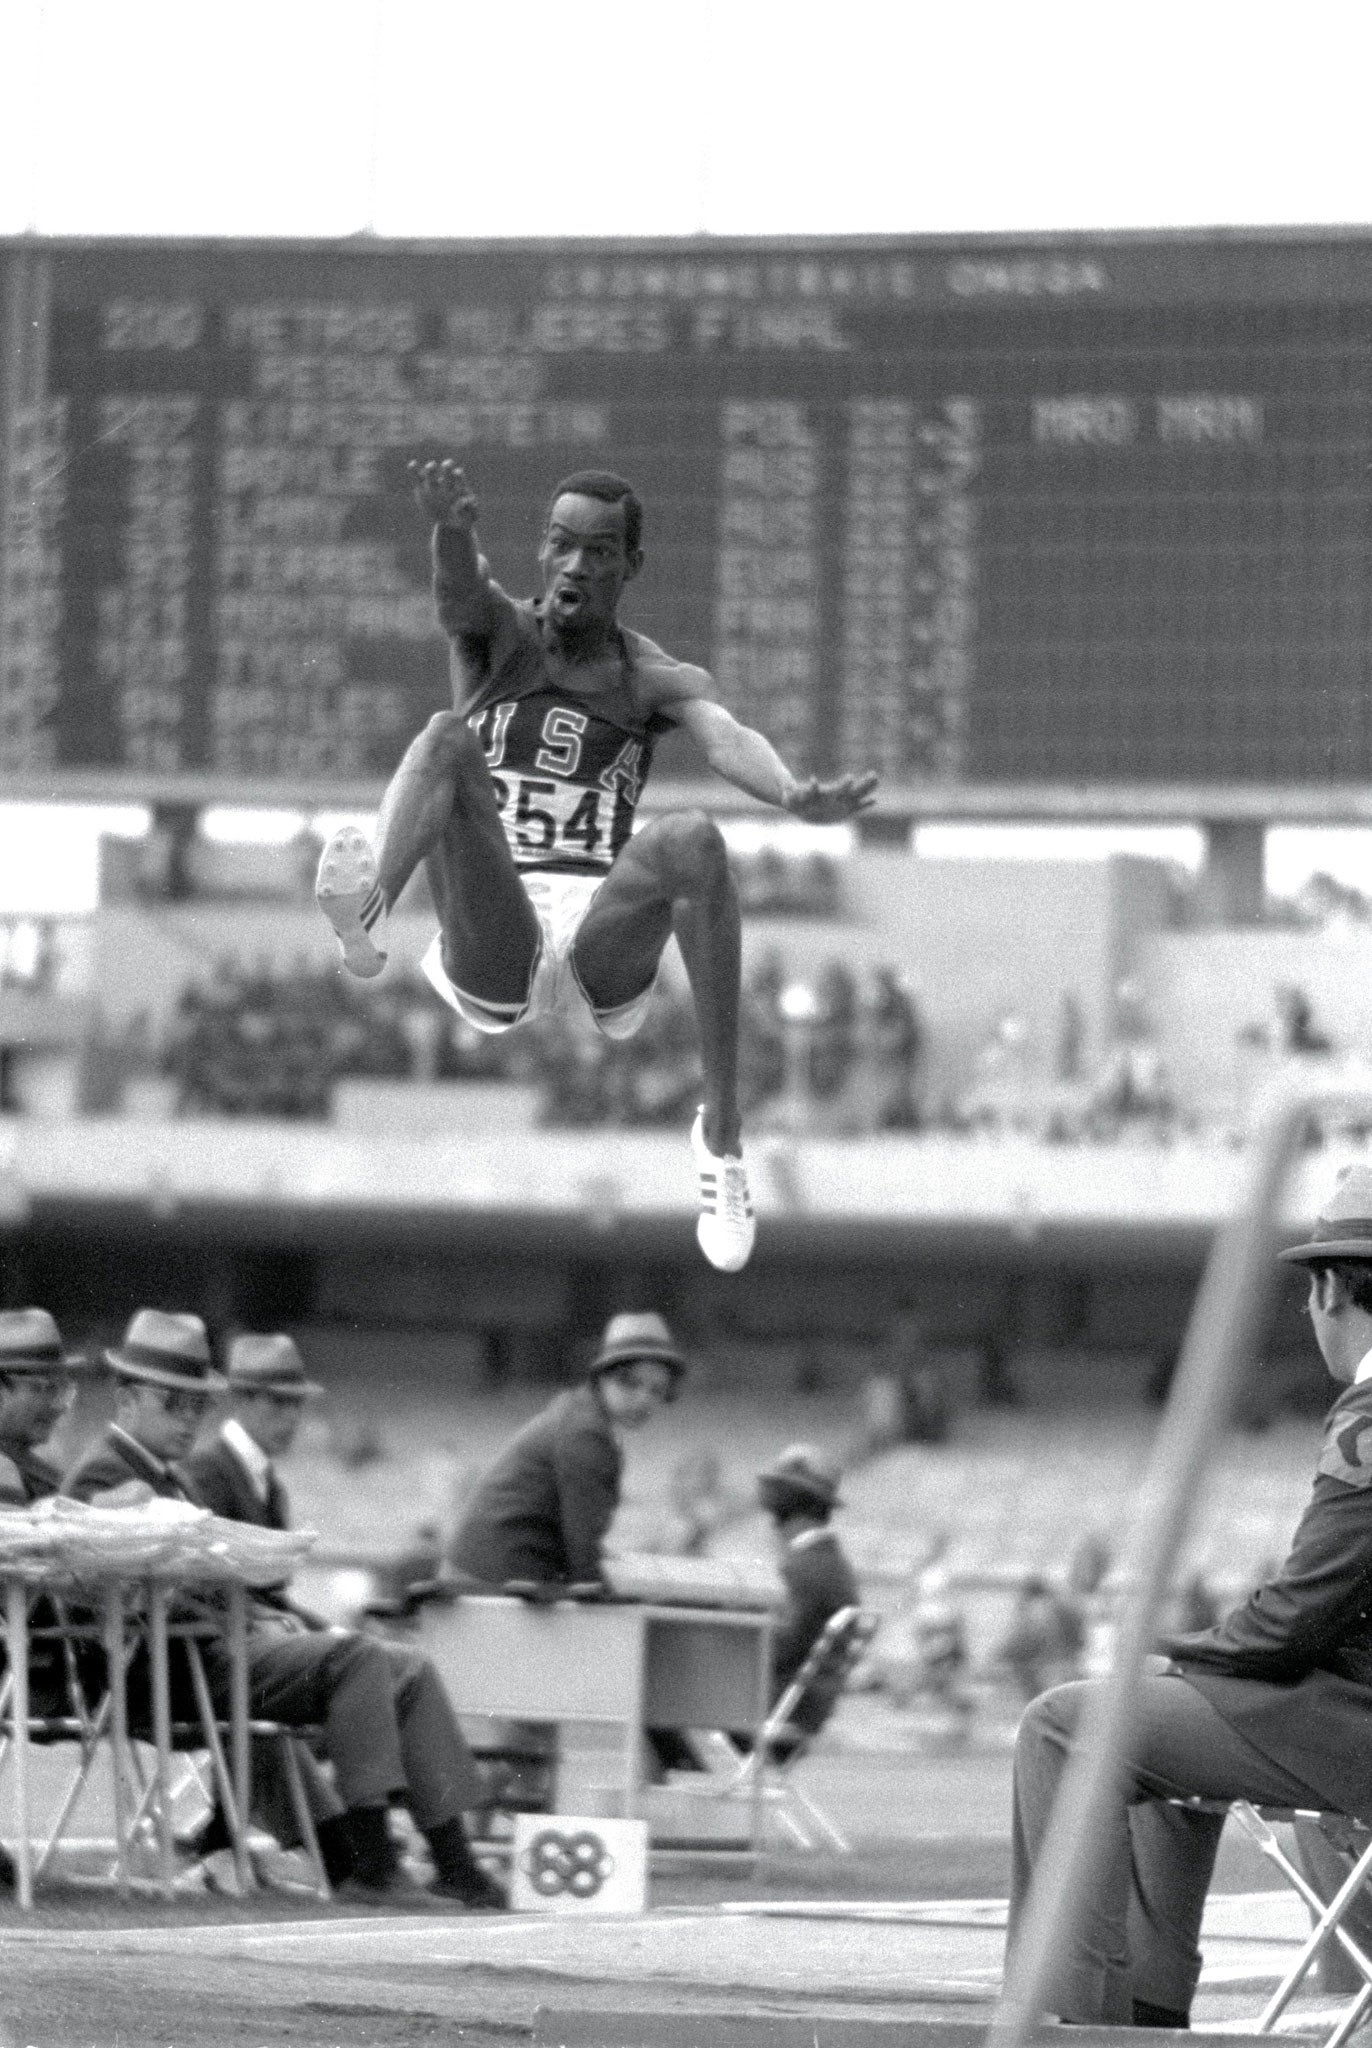 Bob Beamon produces his freak jump in the Mexico City Olympics in 1968